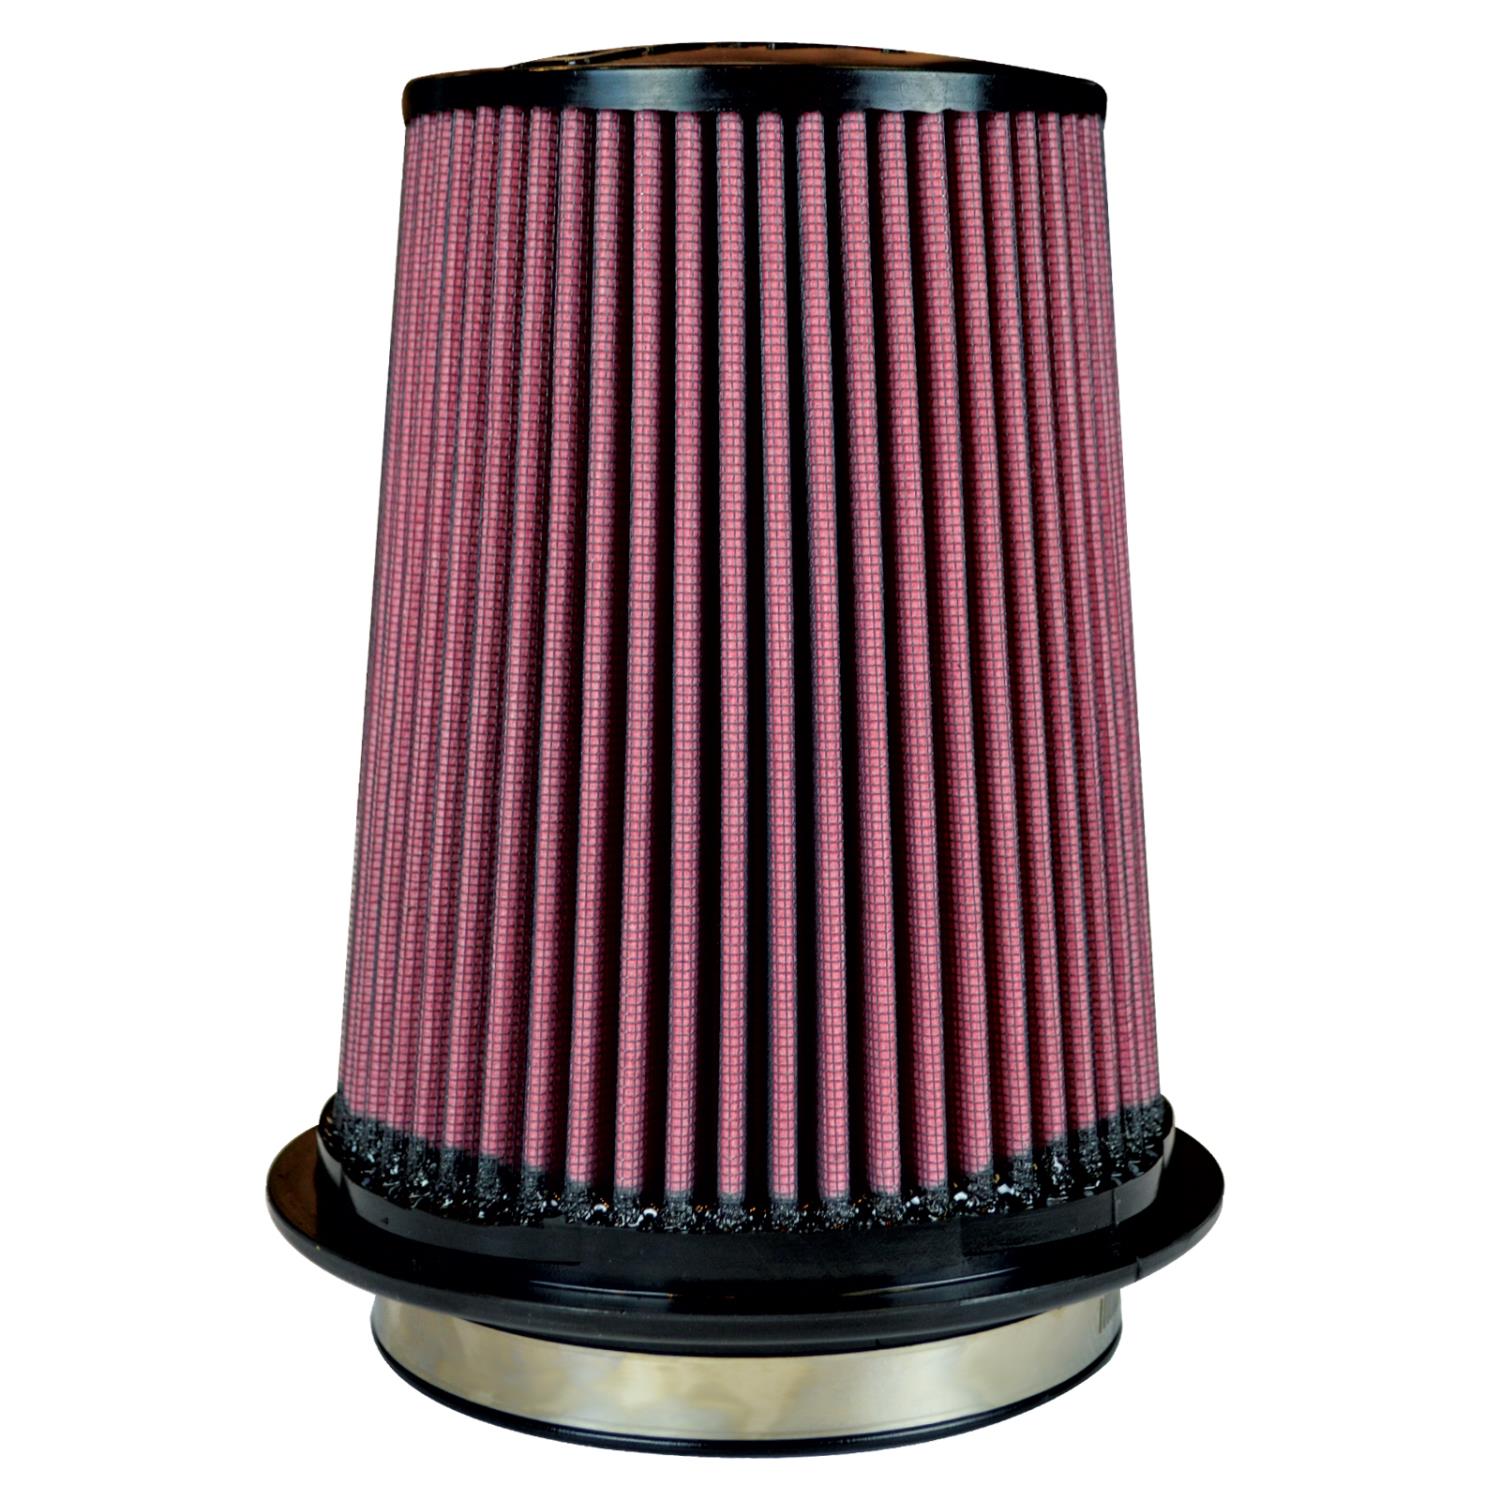 8-Layer Oiled Cotton Gauze Air Filter, 5.00 in. Flange ID, 7 in. Twist Lock Base, 7.90 in. Media Height, 5 in. Top